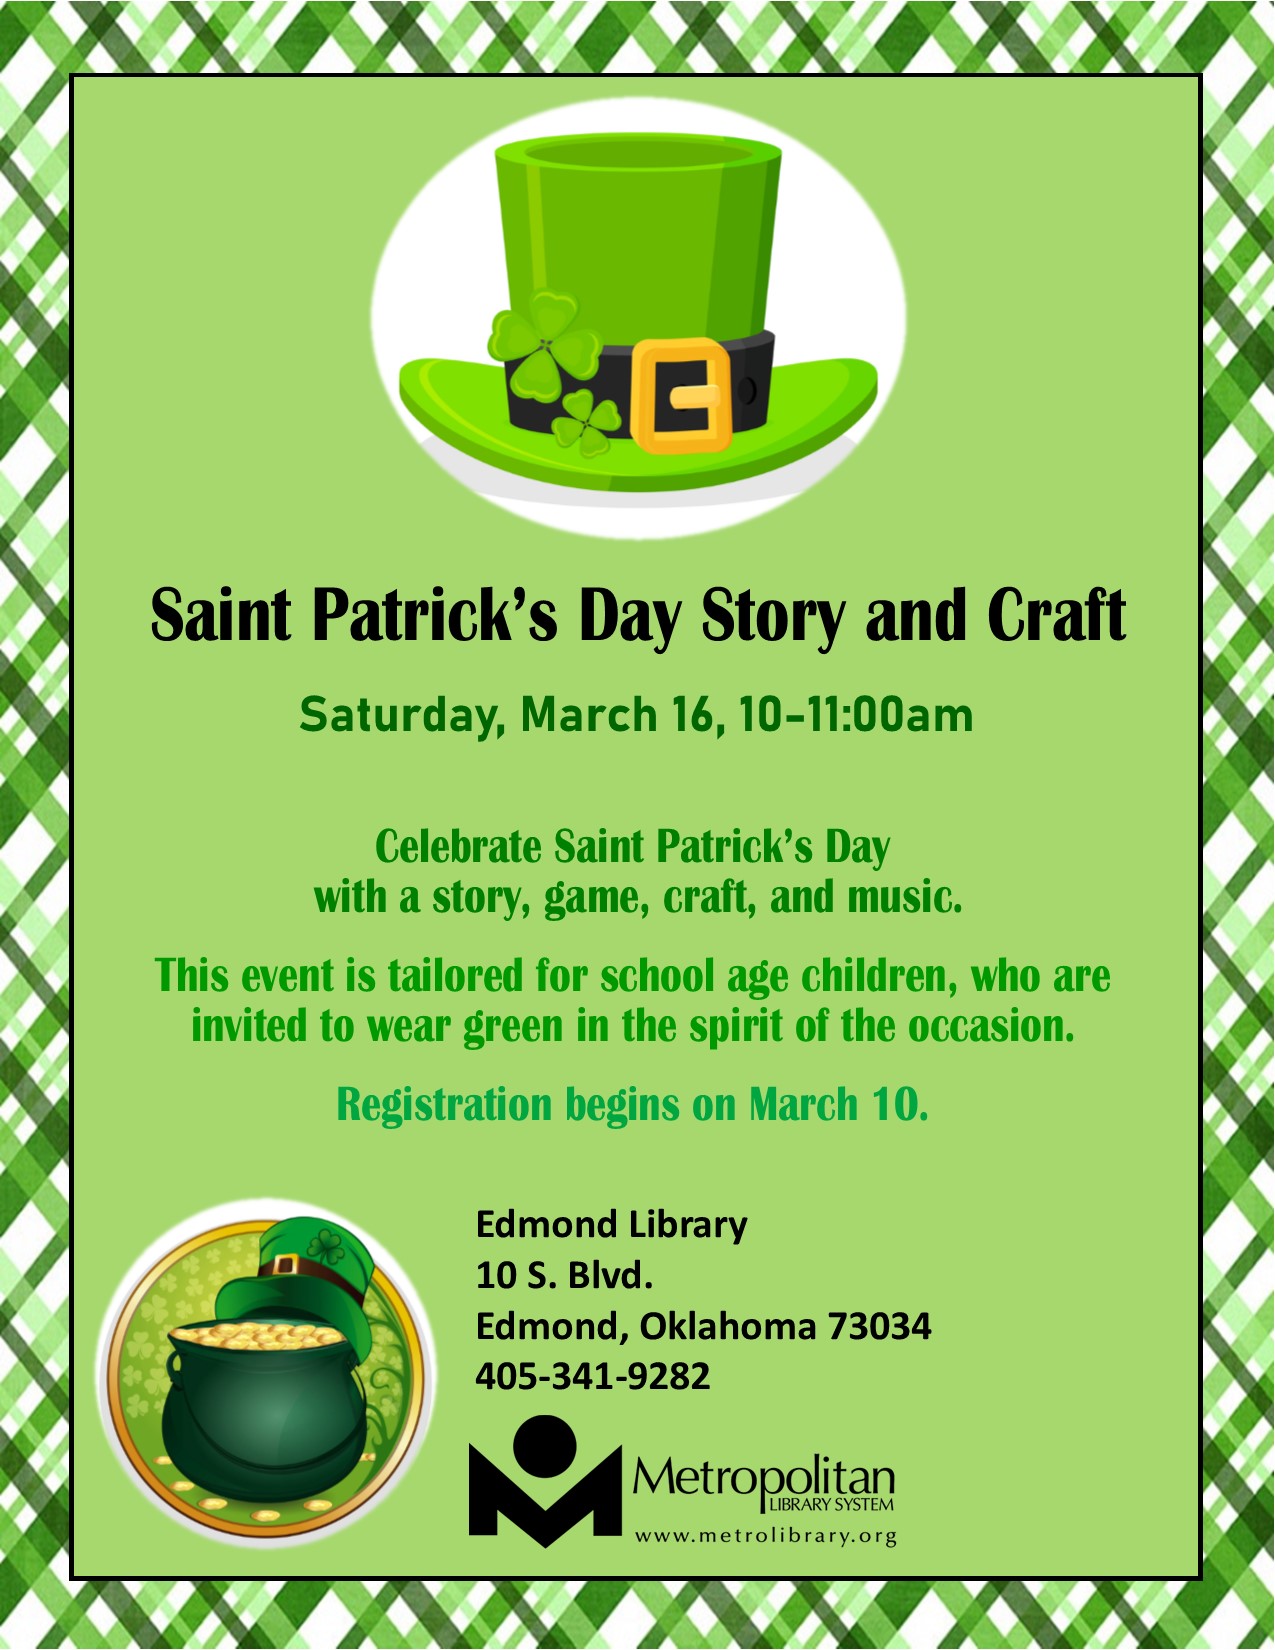 Flyer for Saint Patrick's Day Event